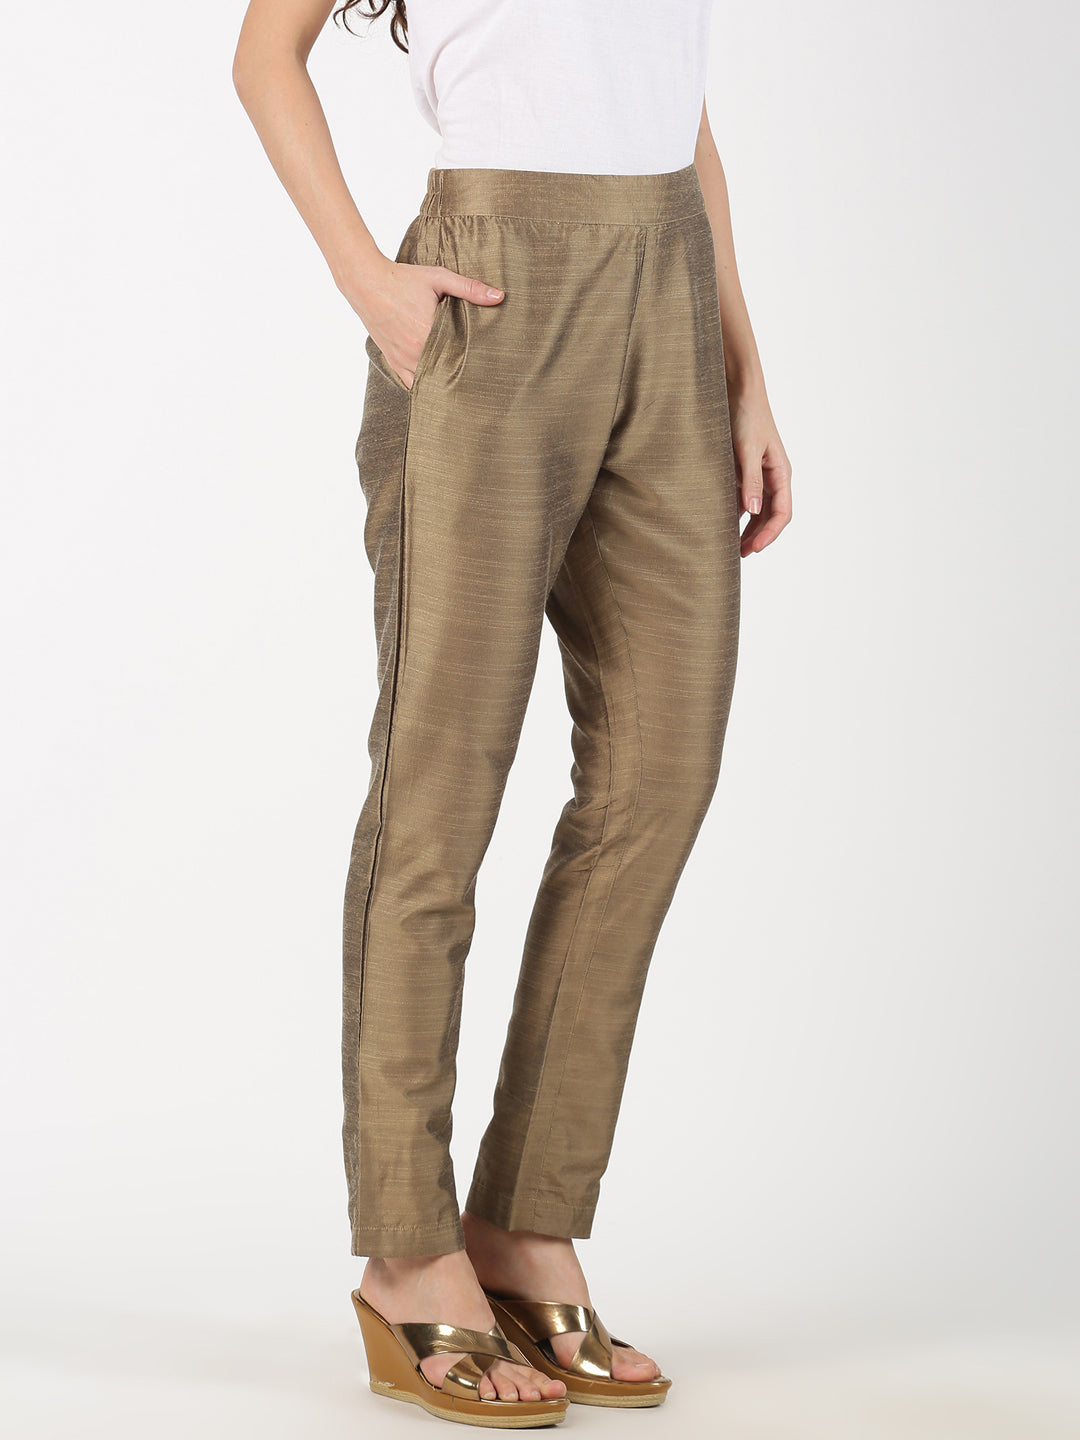 Buy Golden Fitted Pants Online - Shop for W